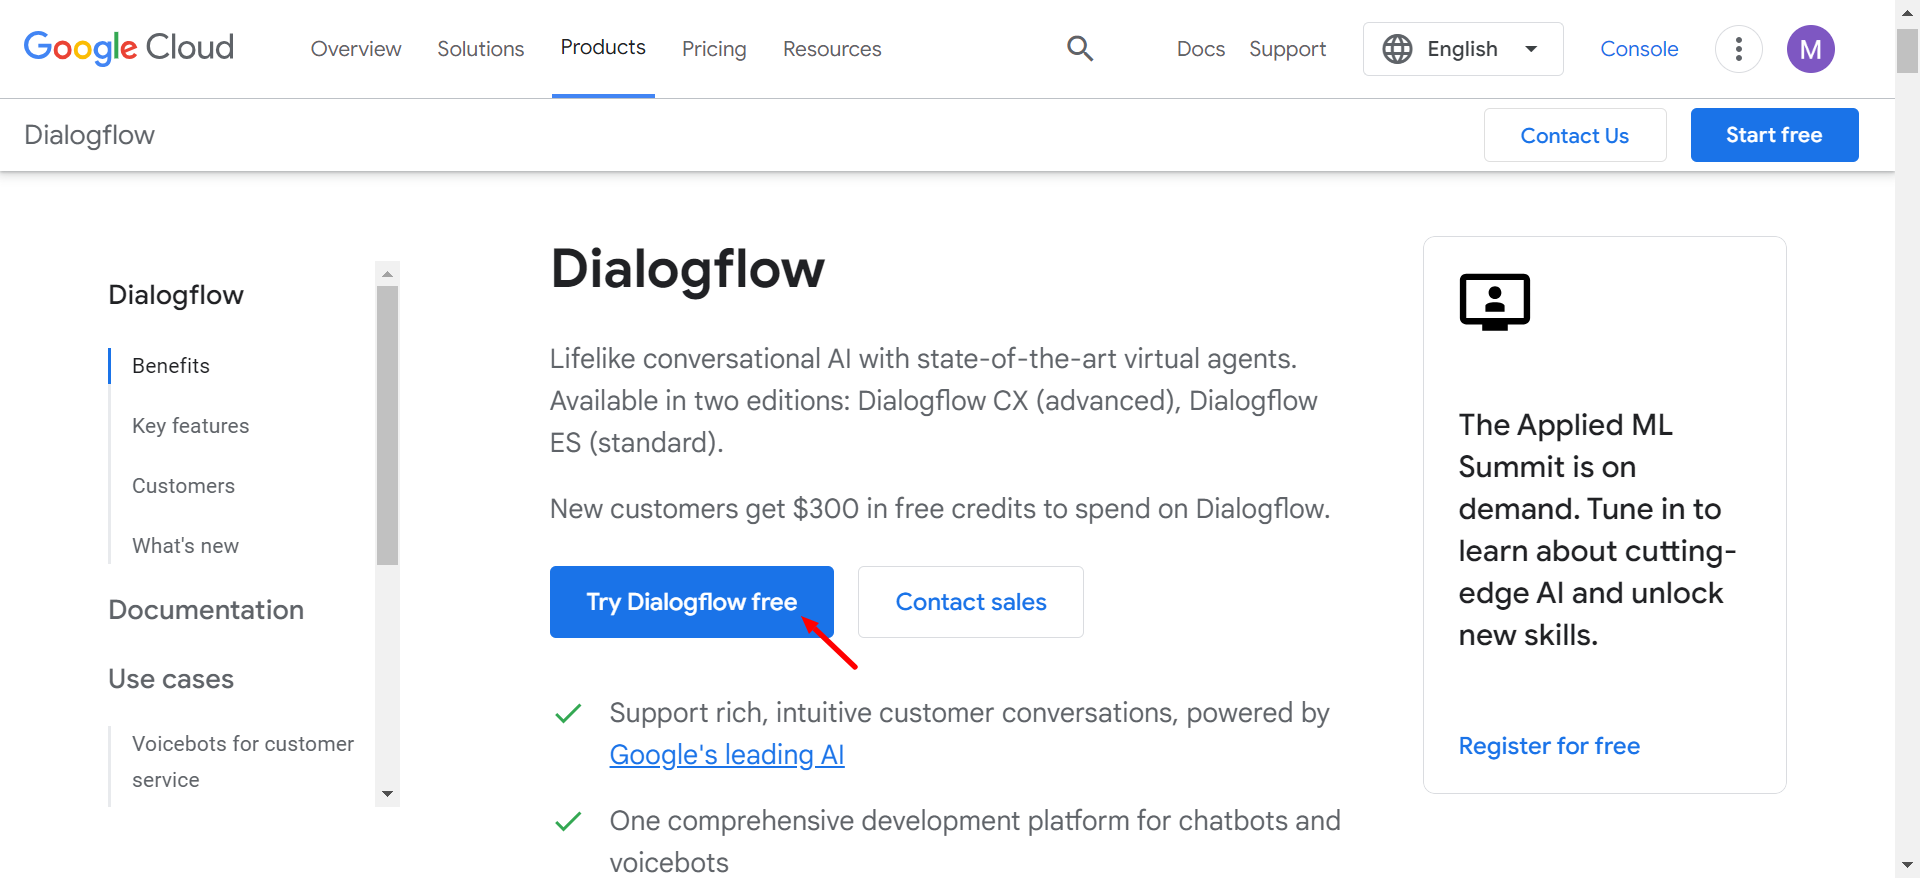 Detailed Guide on Setting up Dialogflow - Artificial Intelligence Based, NLP Optimized for the Google Assistant and Chatbot Development | Dialogflow Signup for free